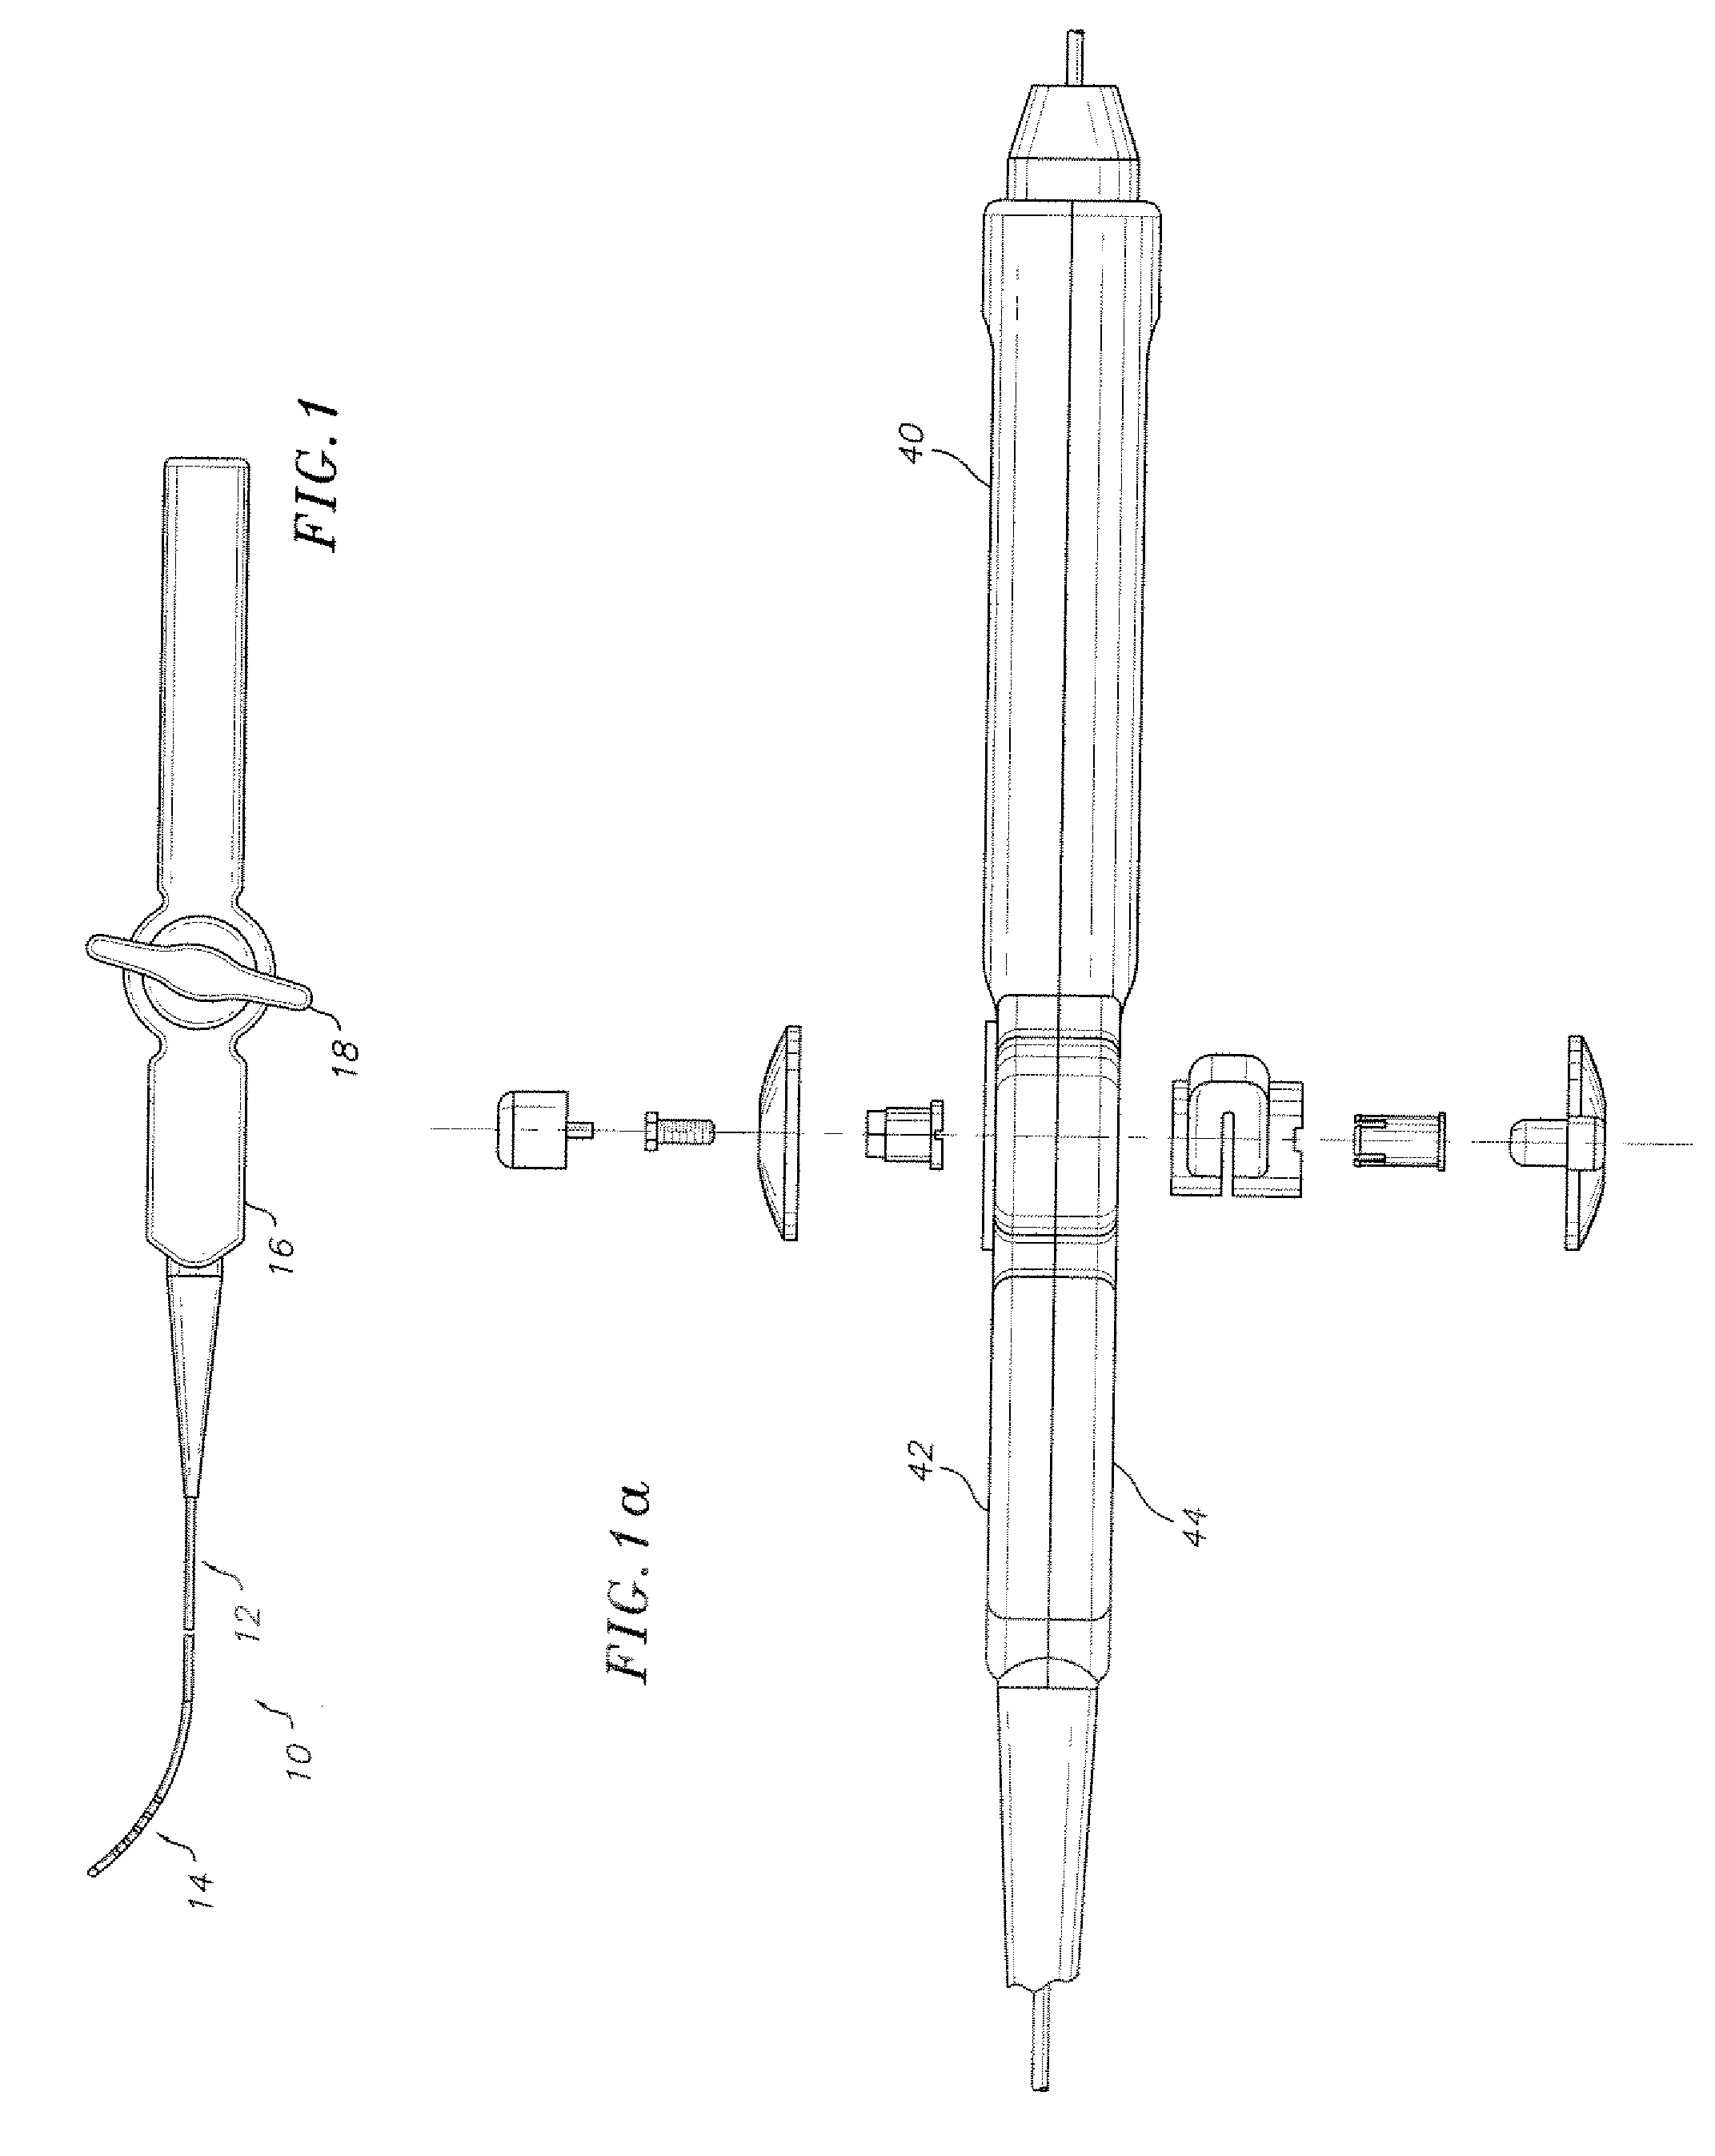 Insert molded catheter puller member connectors and method of making